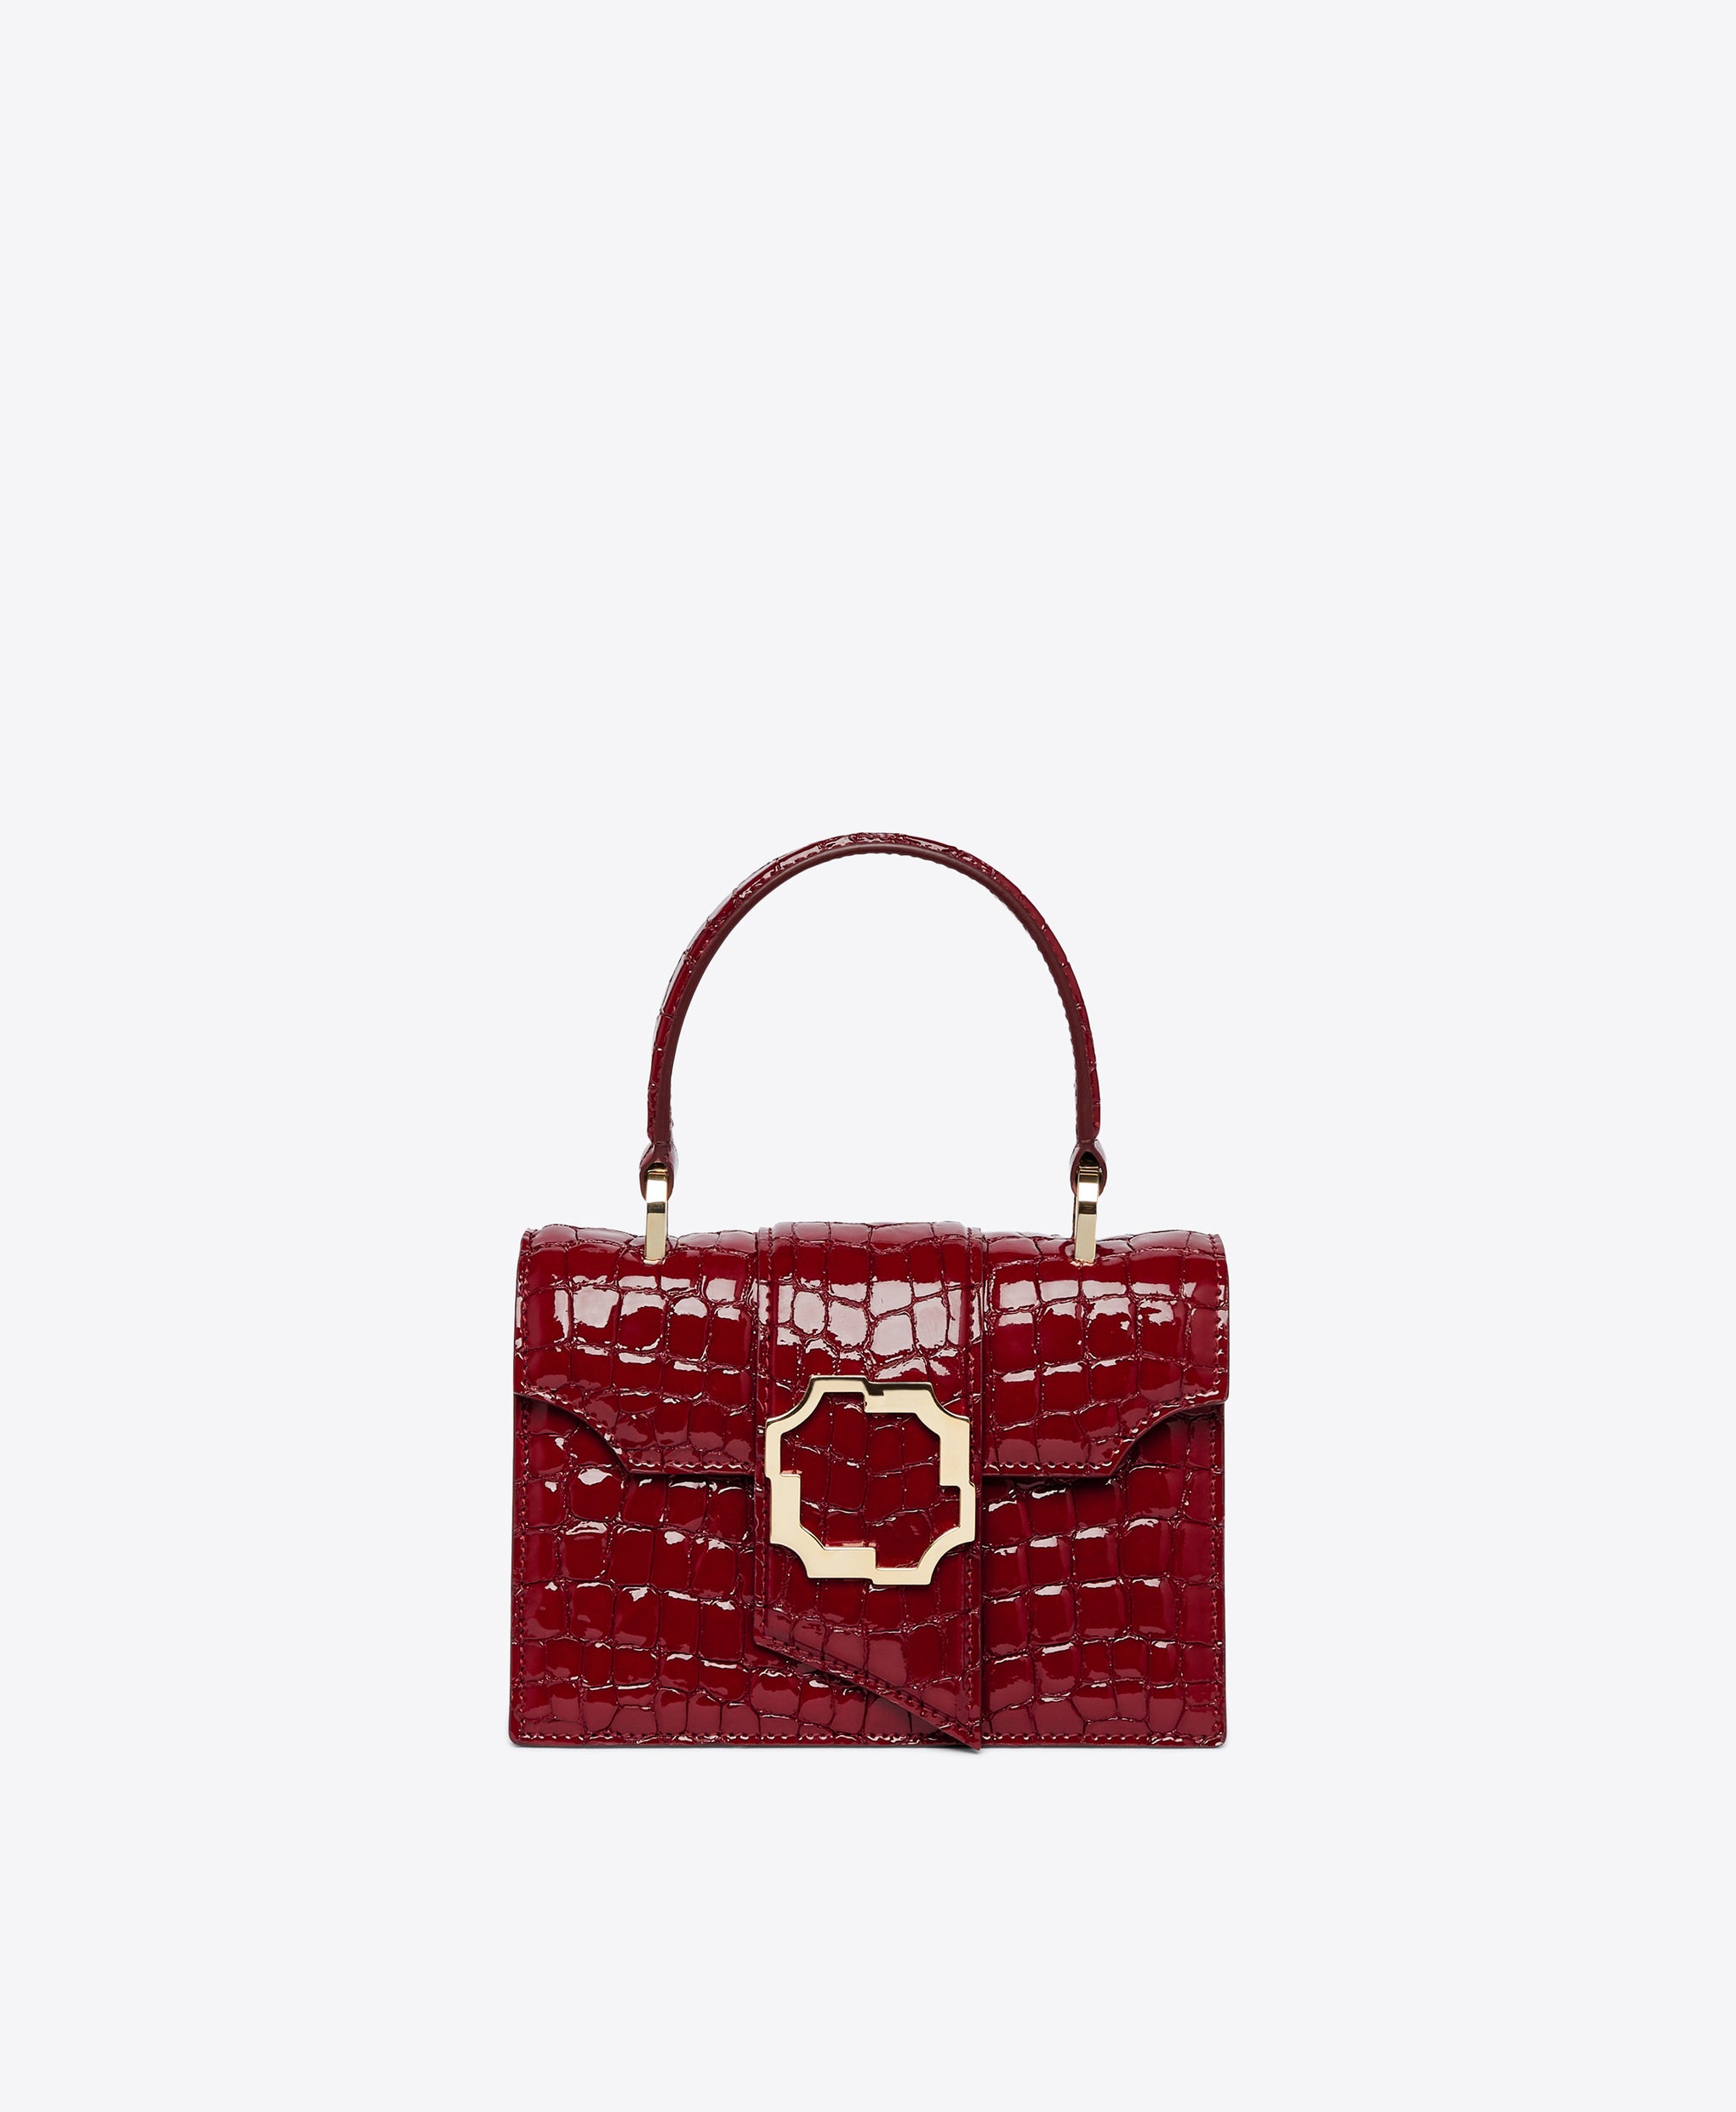 Women's Burgundy Embossed Patent Top Handle Bag with Crest Buckle | Malone Souliers